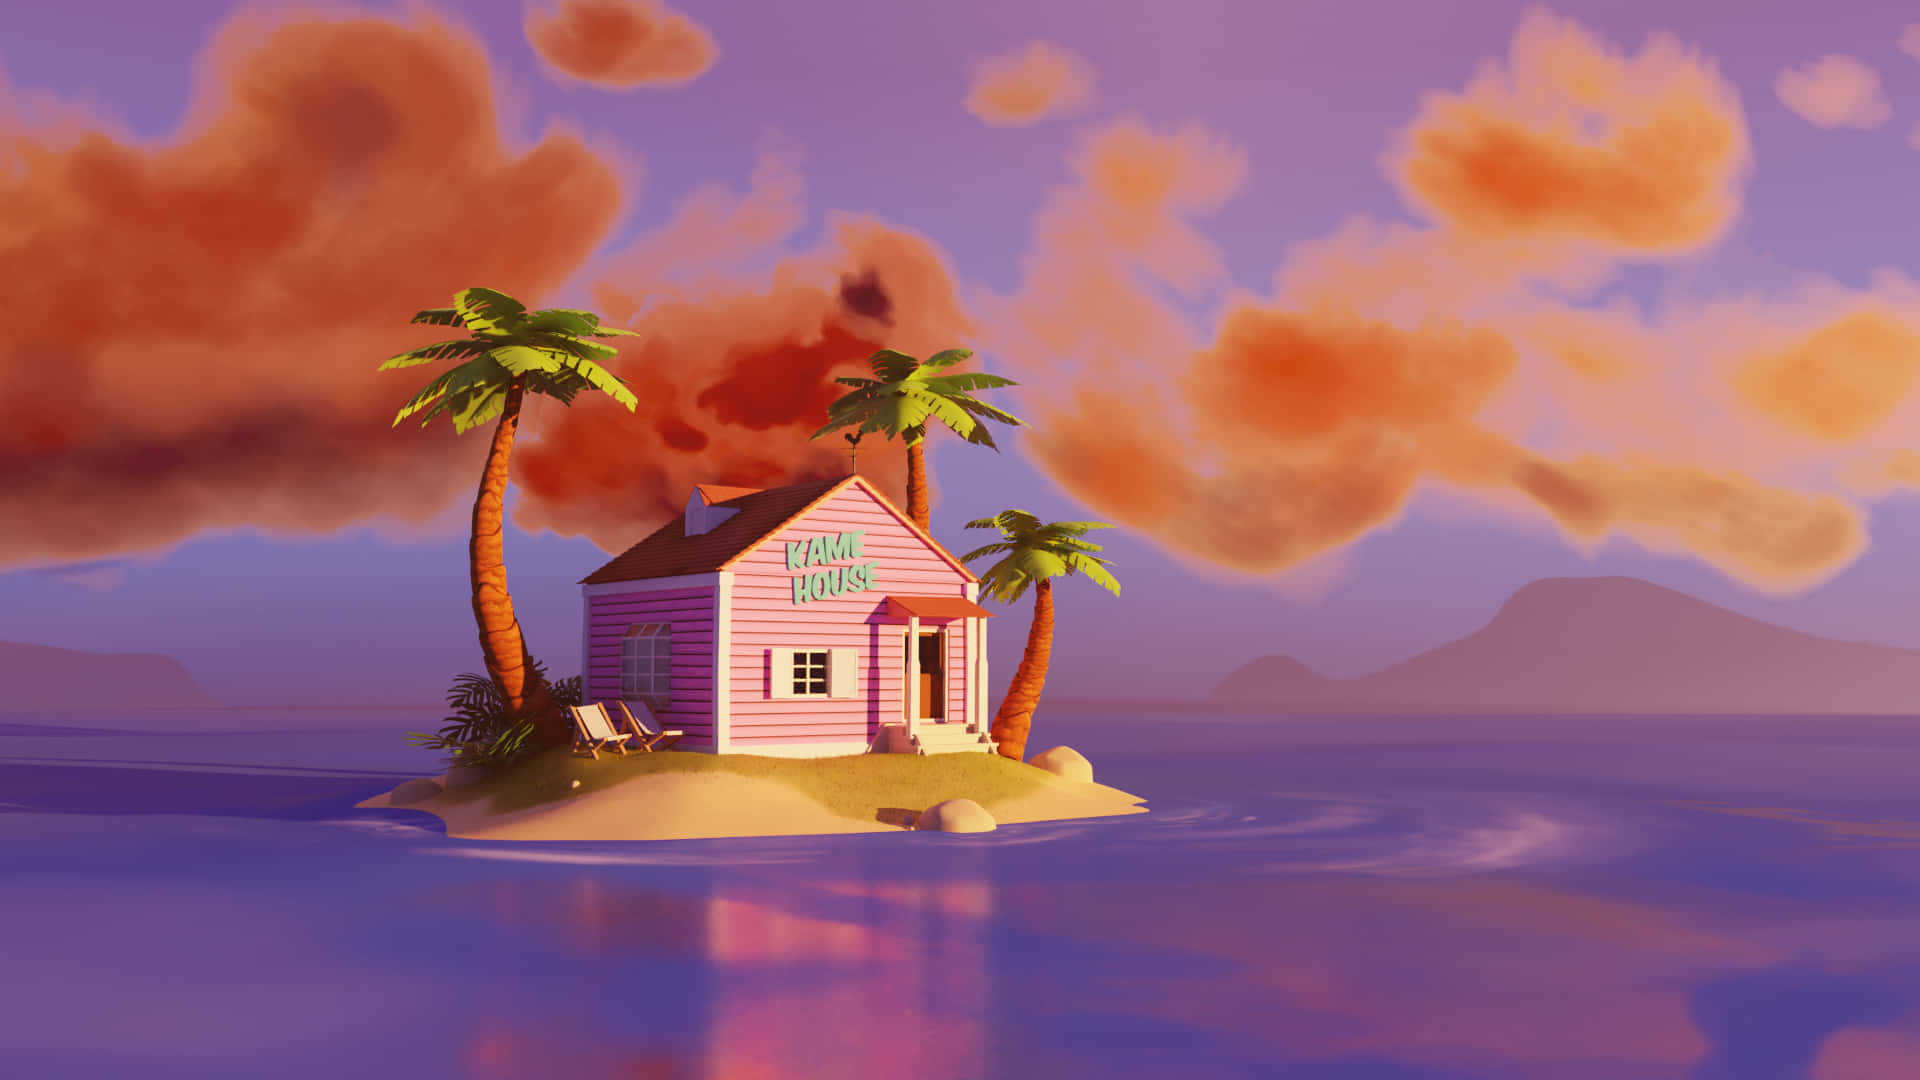 A Pink House On An Island With Palm Trees Wallpaper